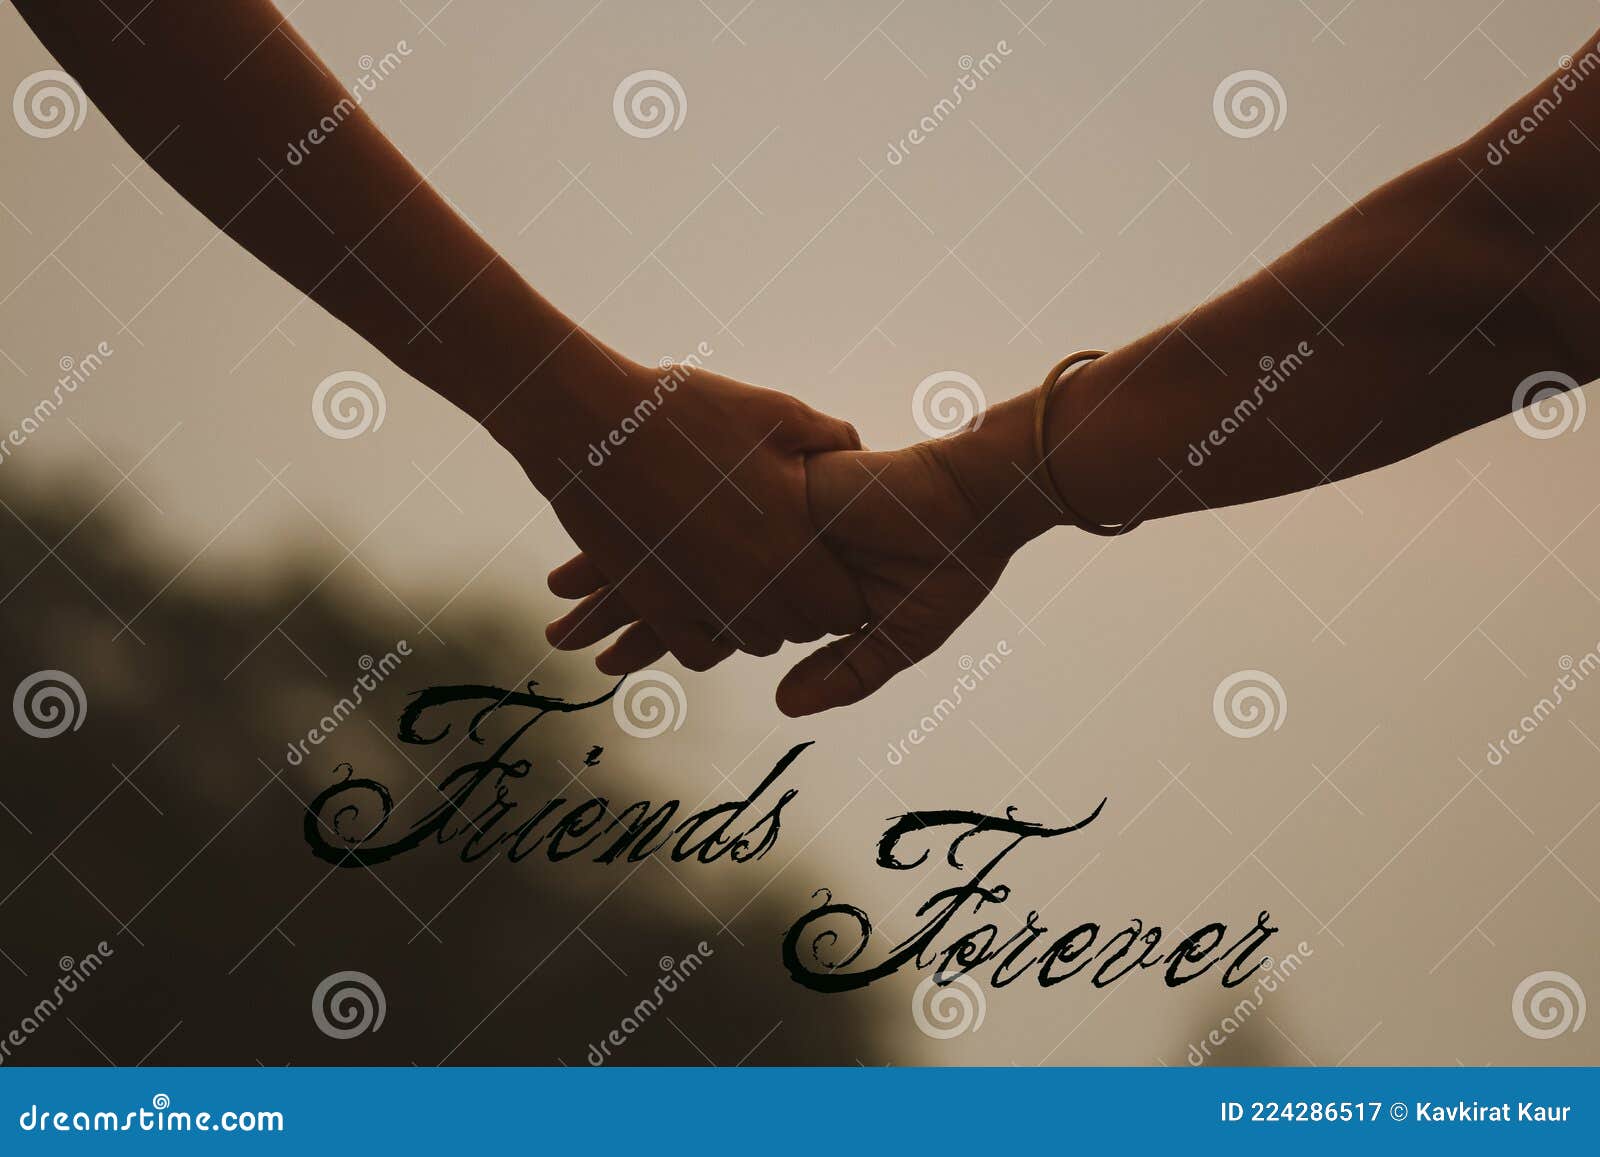 Illustration of Two Friends Holding Each Other Hands in the Sky Friends  Forever Friendship Day Special Stock Image - Image of pain, holding:  224286517